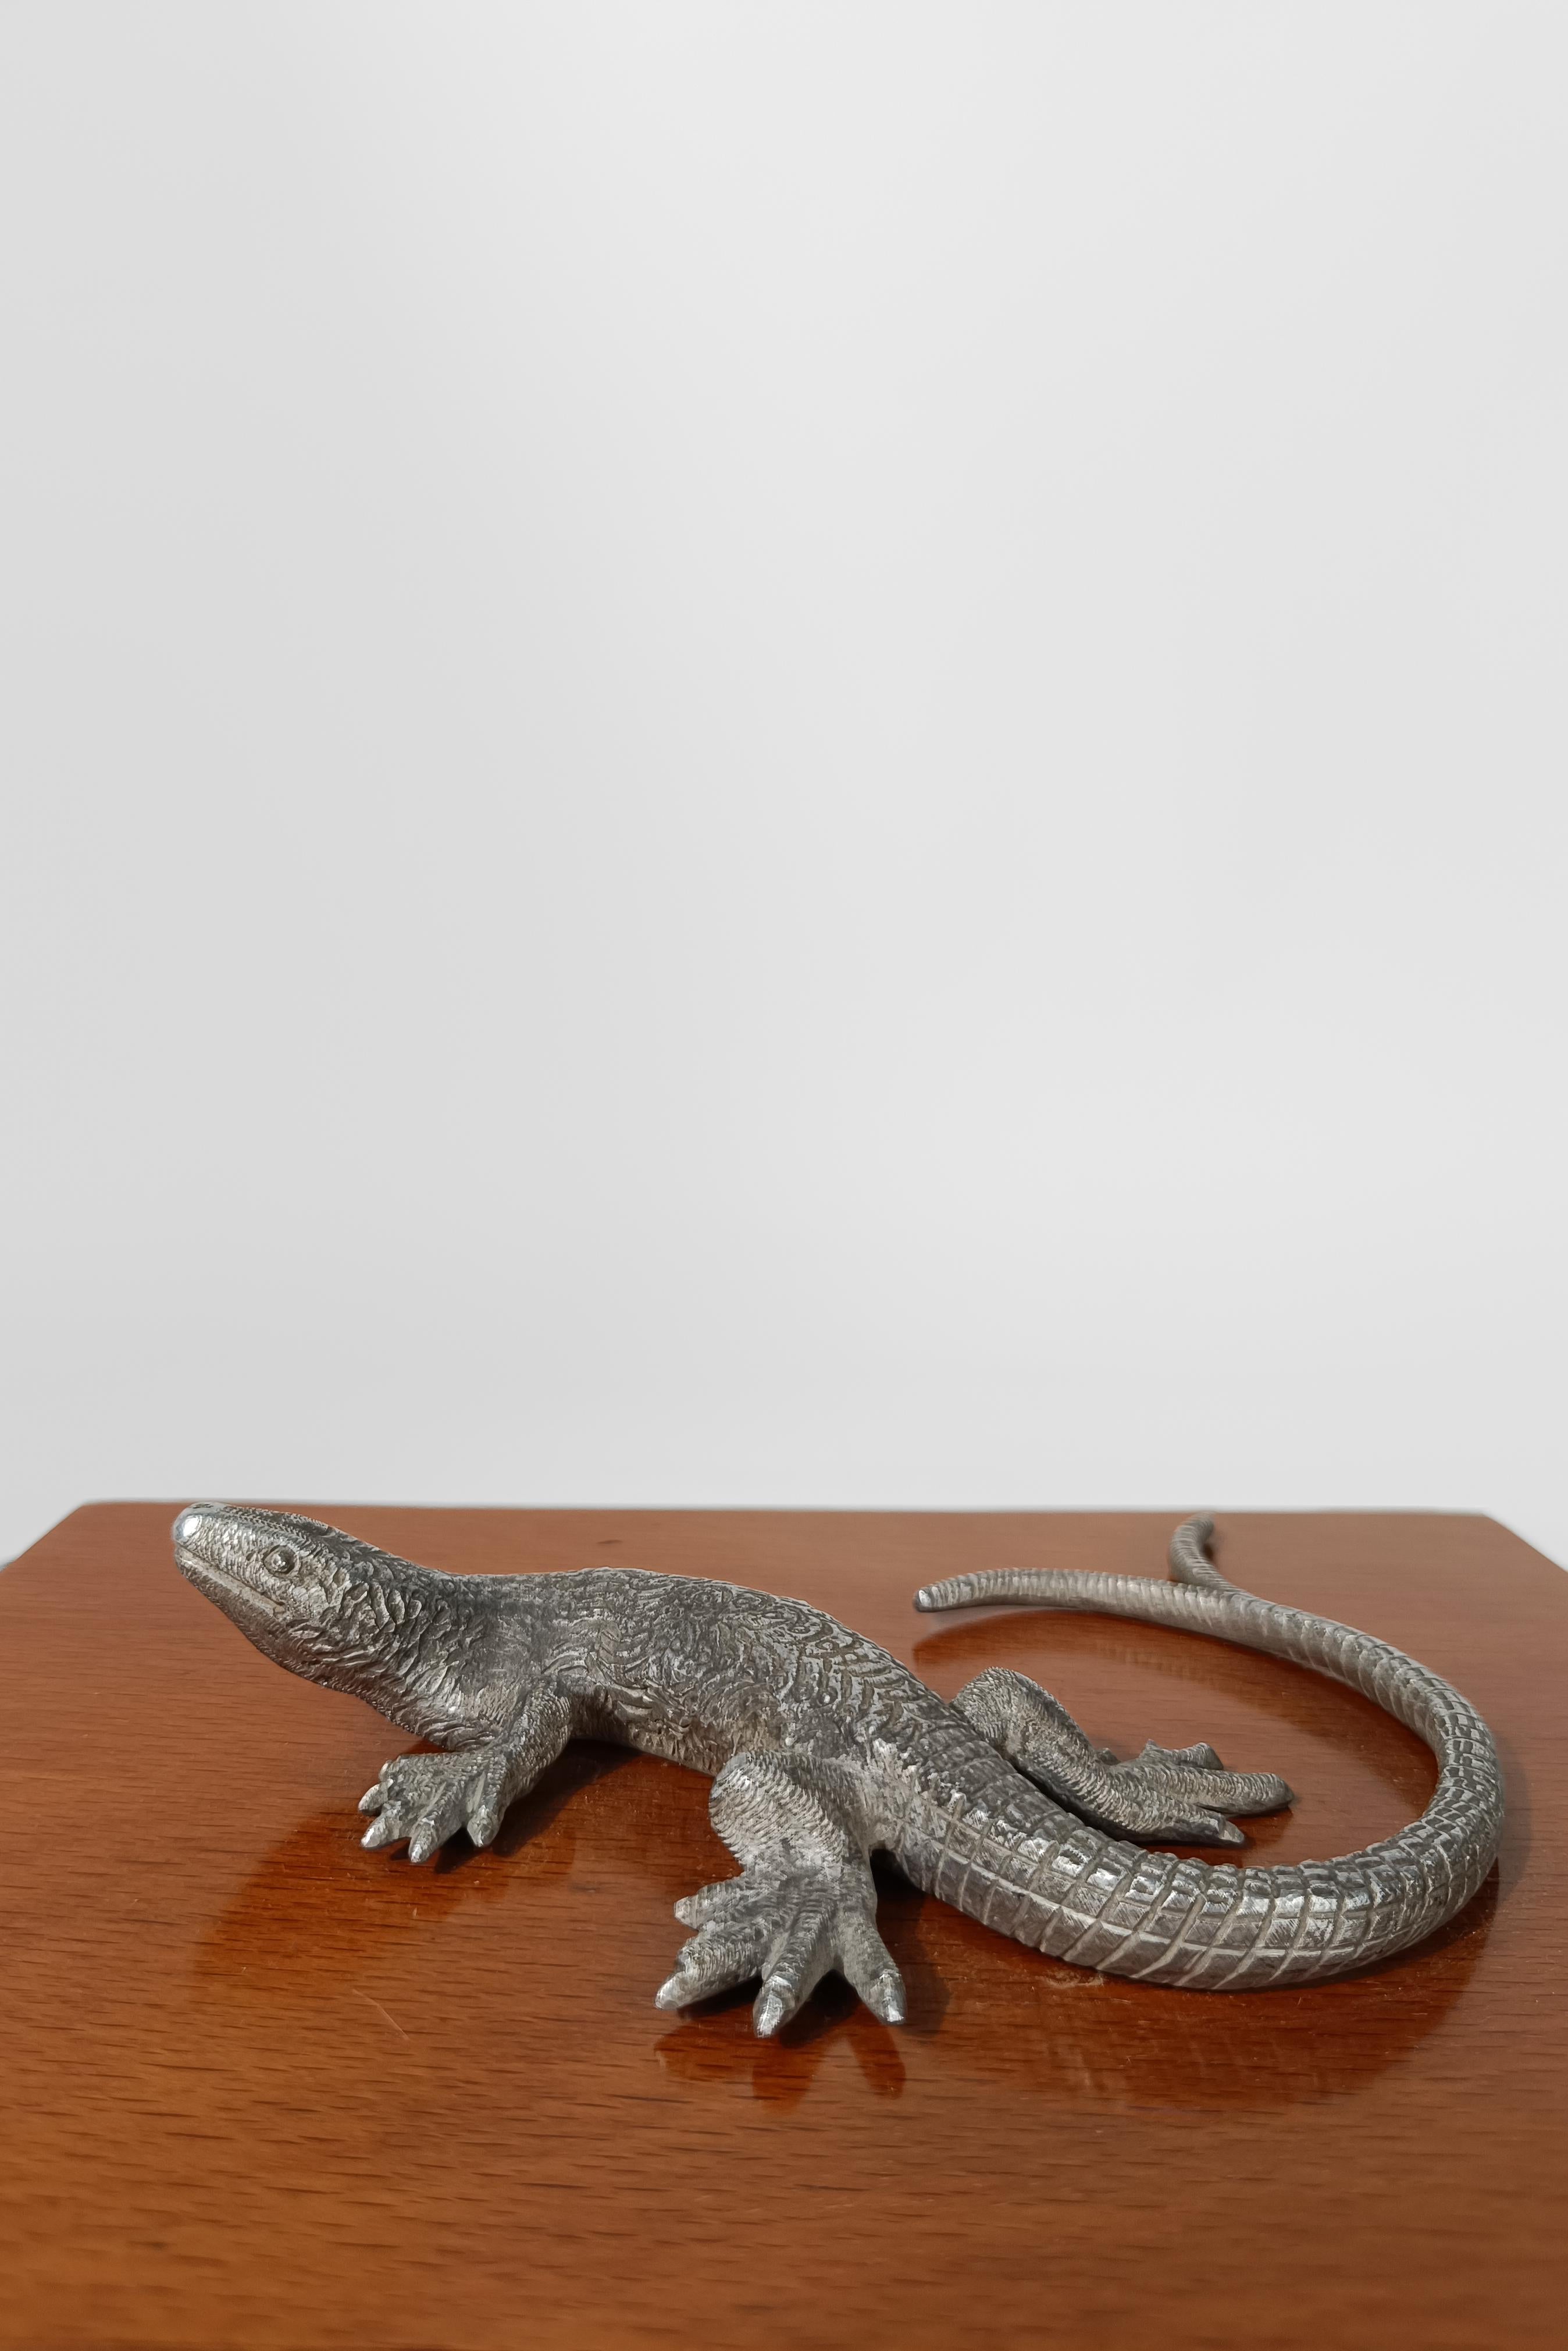 Art Deco wooden Box decorated with a Silver Tone Metal Lizard-shaped Handle For Sale 9